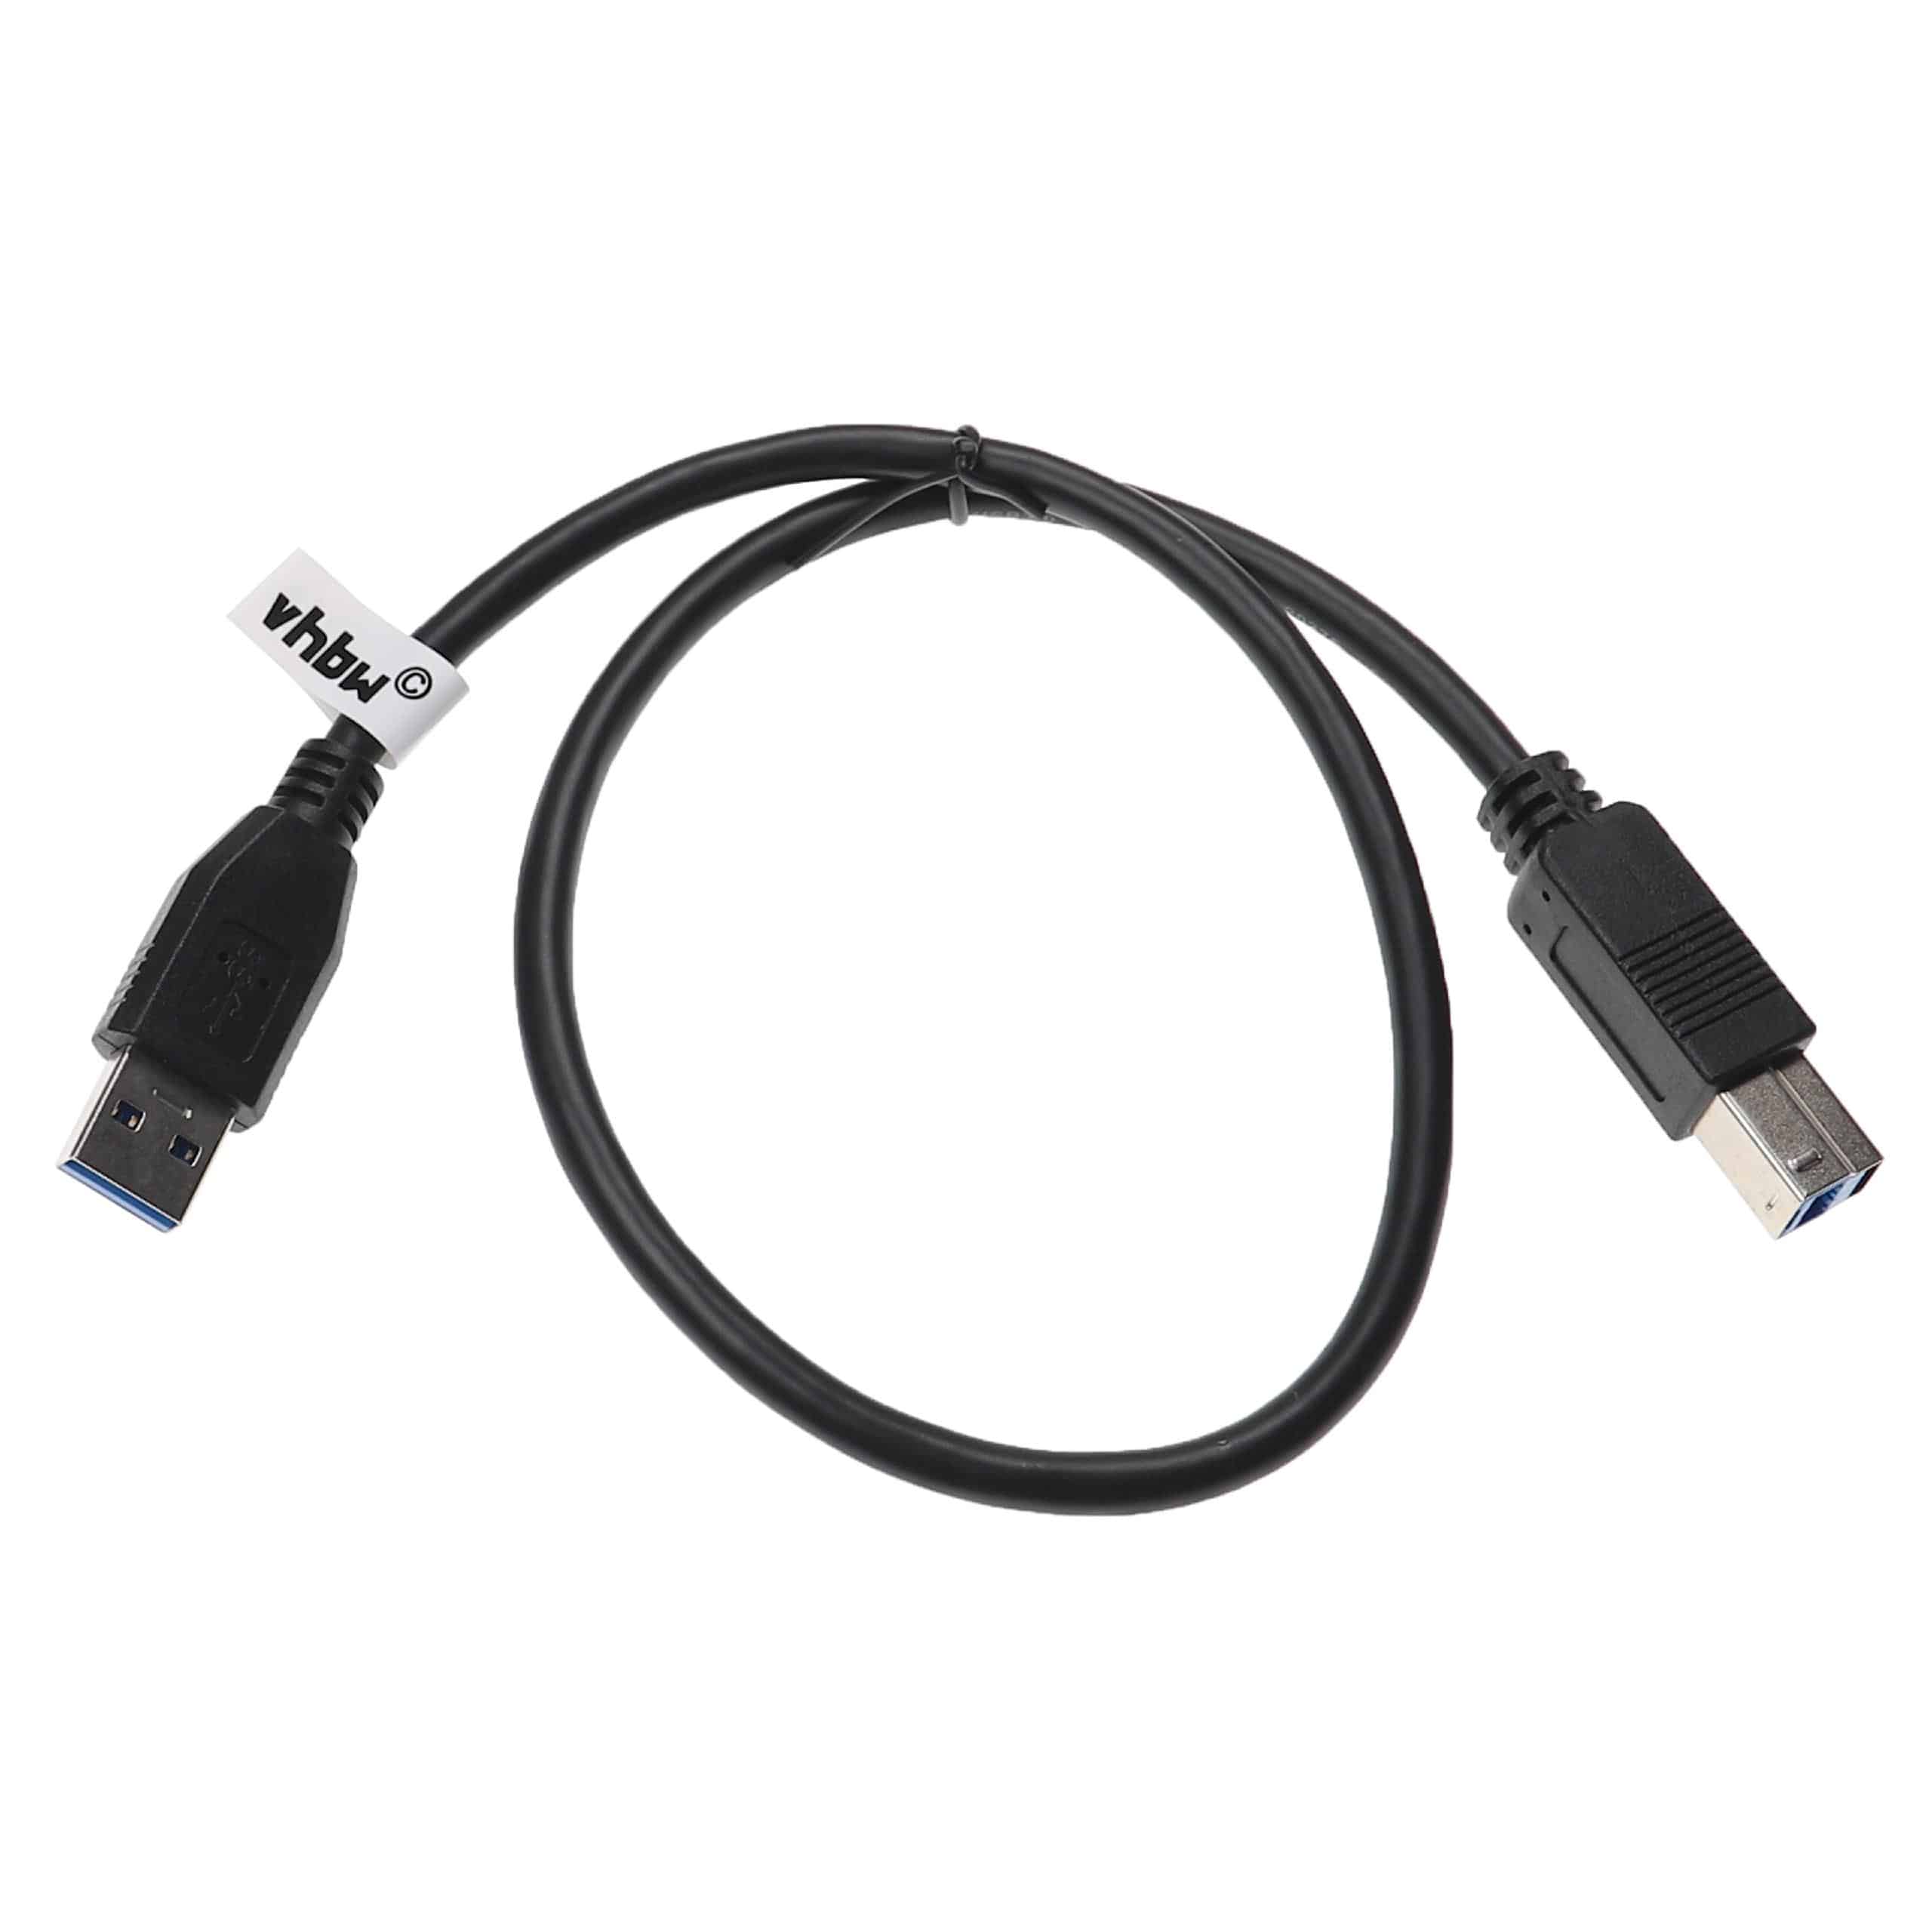 USB 3.0 Cable Type A to Type B - USB Data Cable 50 cm, Black